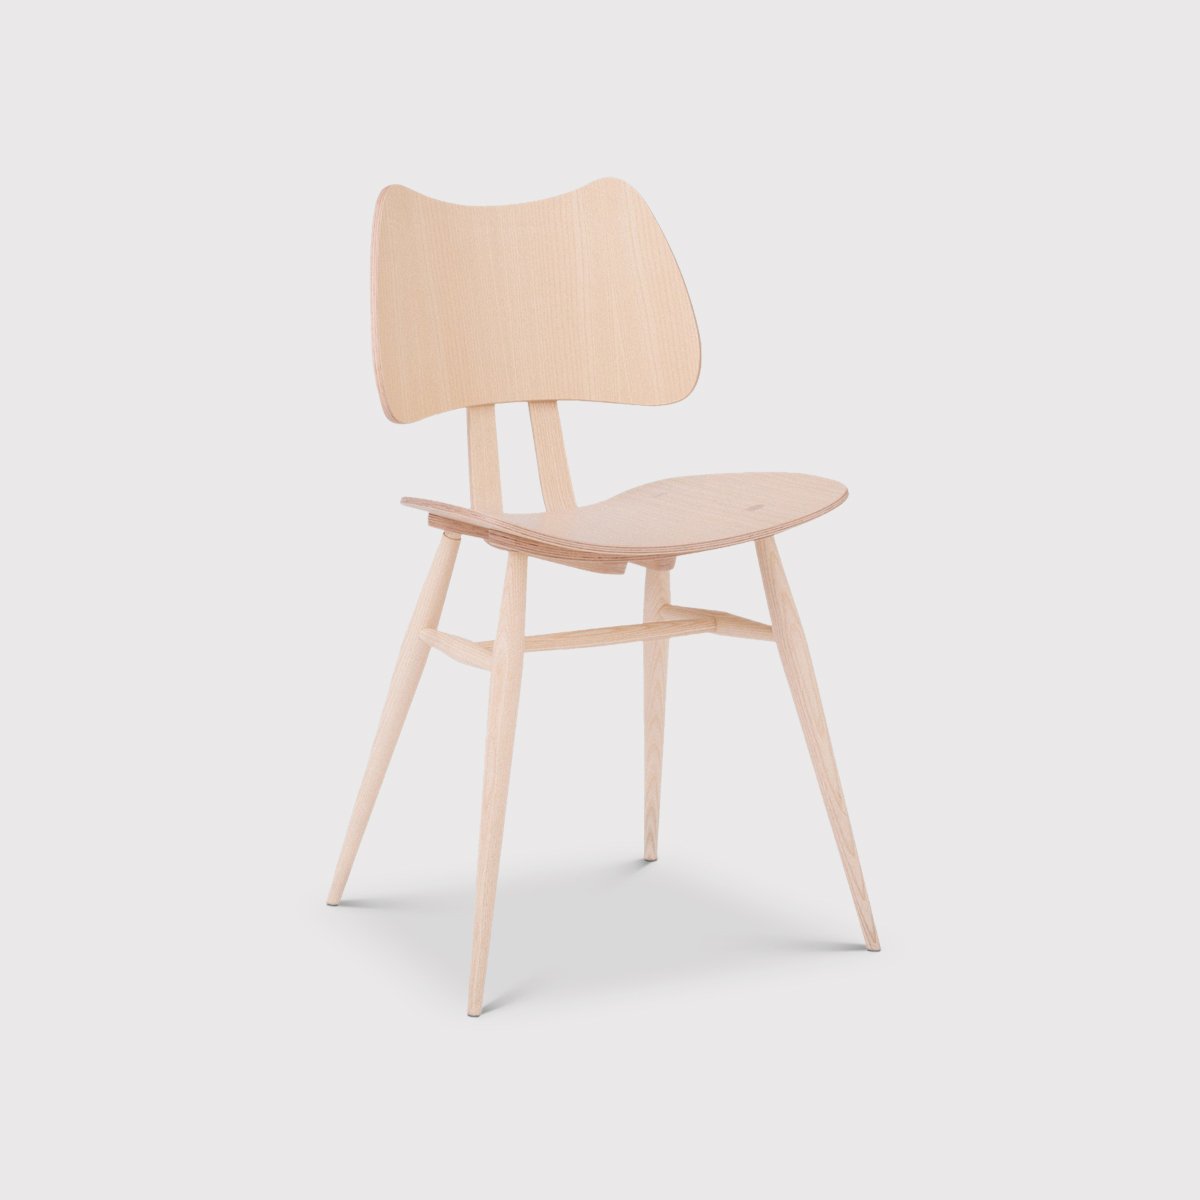 L.Ercolani Butterfly Dining Chair, Timber Wood | Barker & Stonehouse